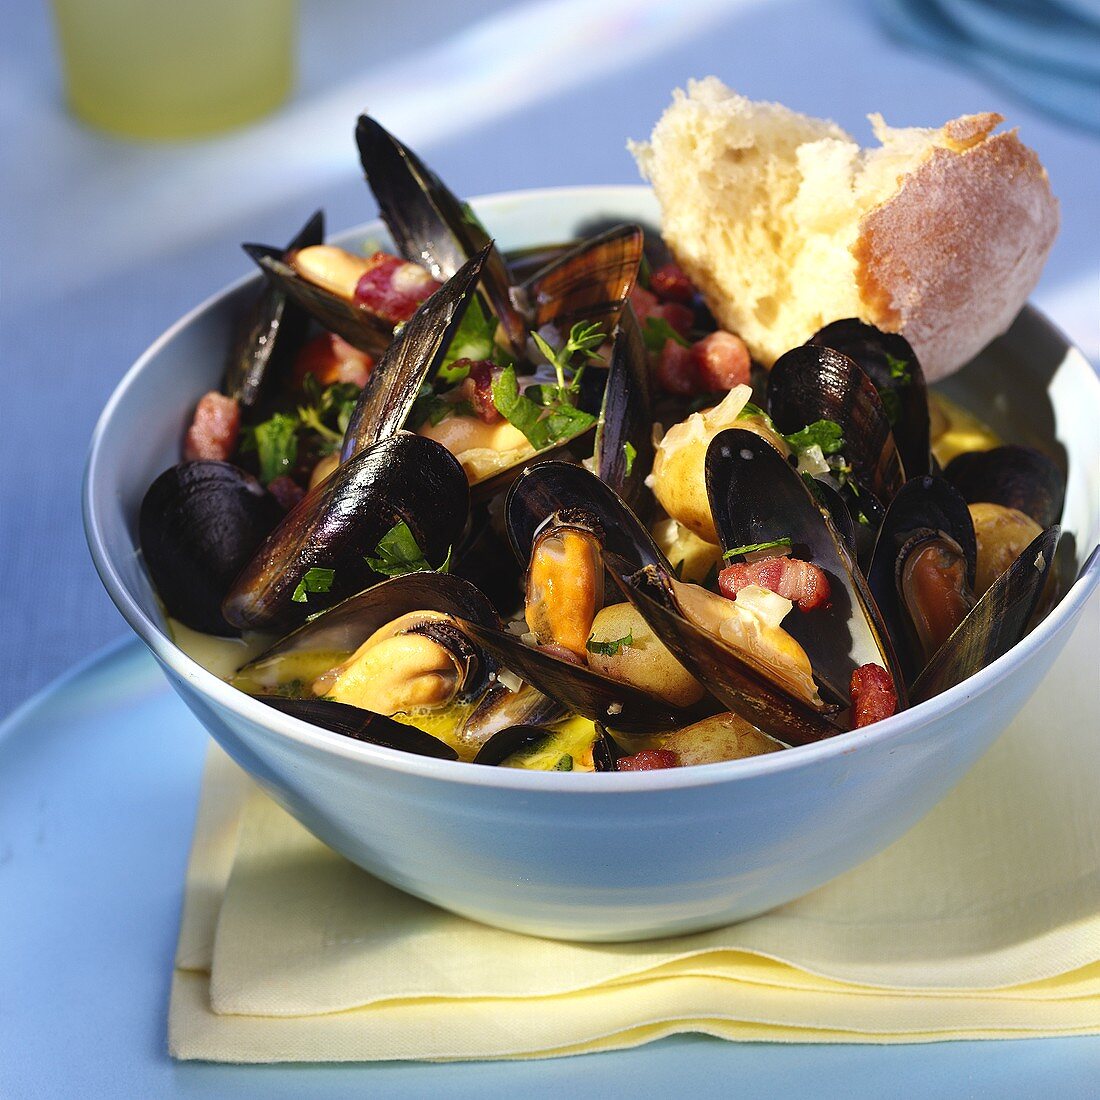 Mussels with diced bacon in cooking liquor